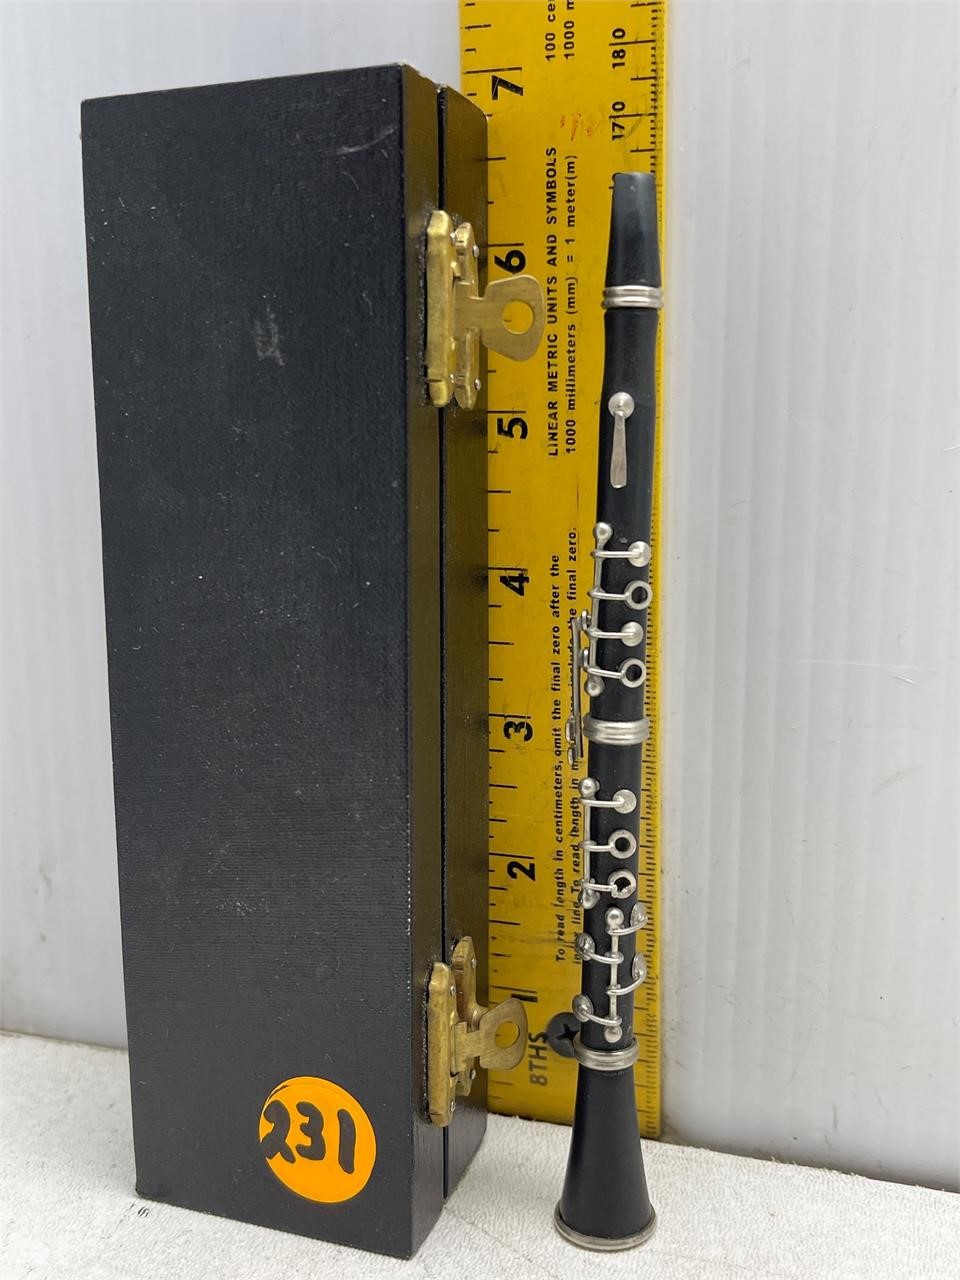 6" CLARINET DISPLAY IN CASE